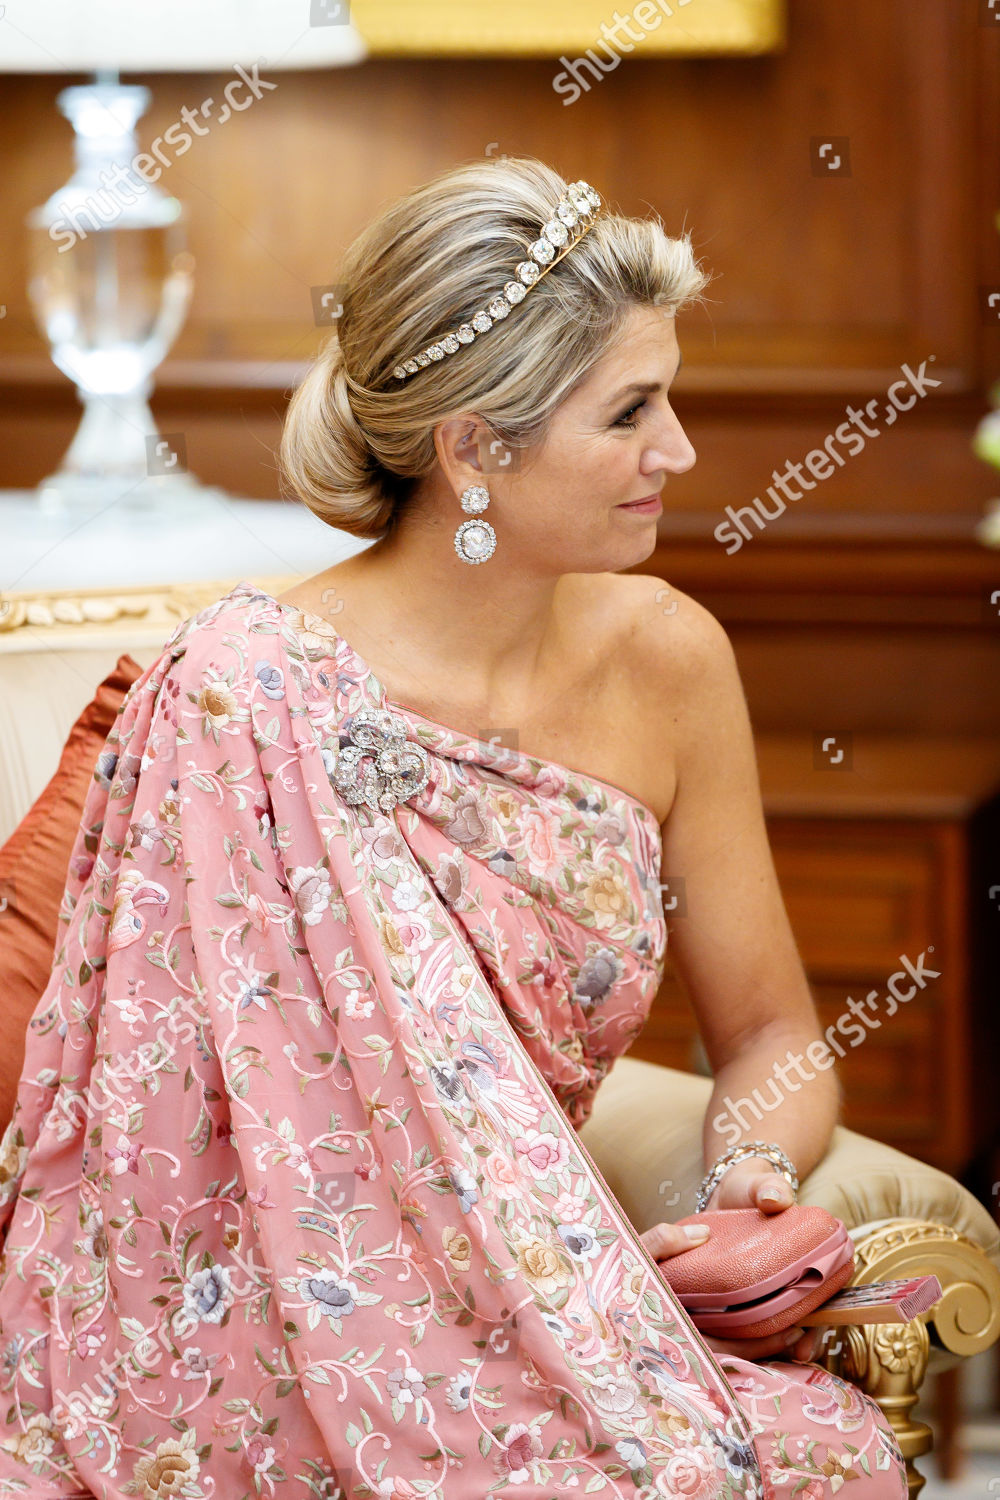 dutch-royals-state-visit-to-india-shutterstock-editorial-10444185f.jpg